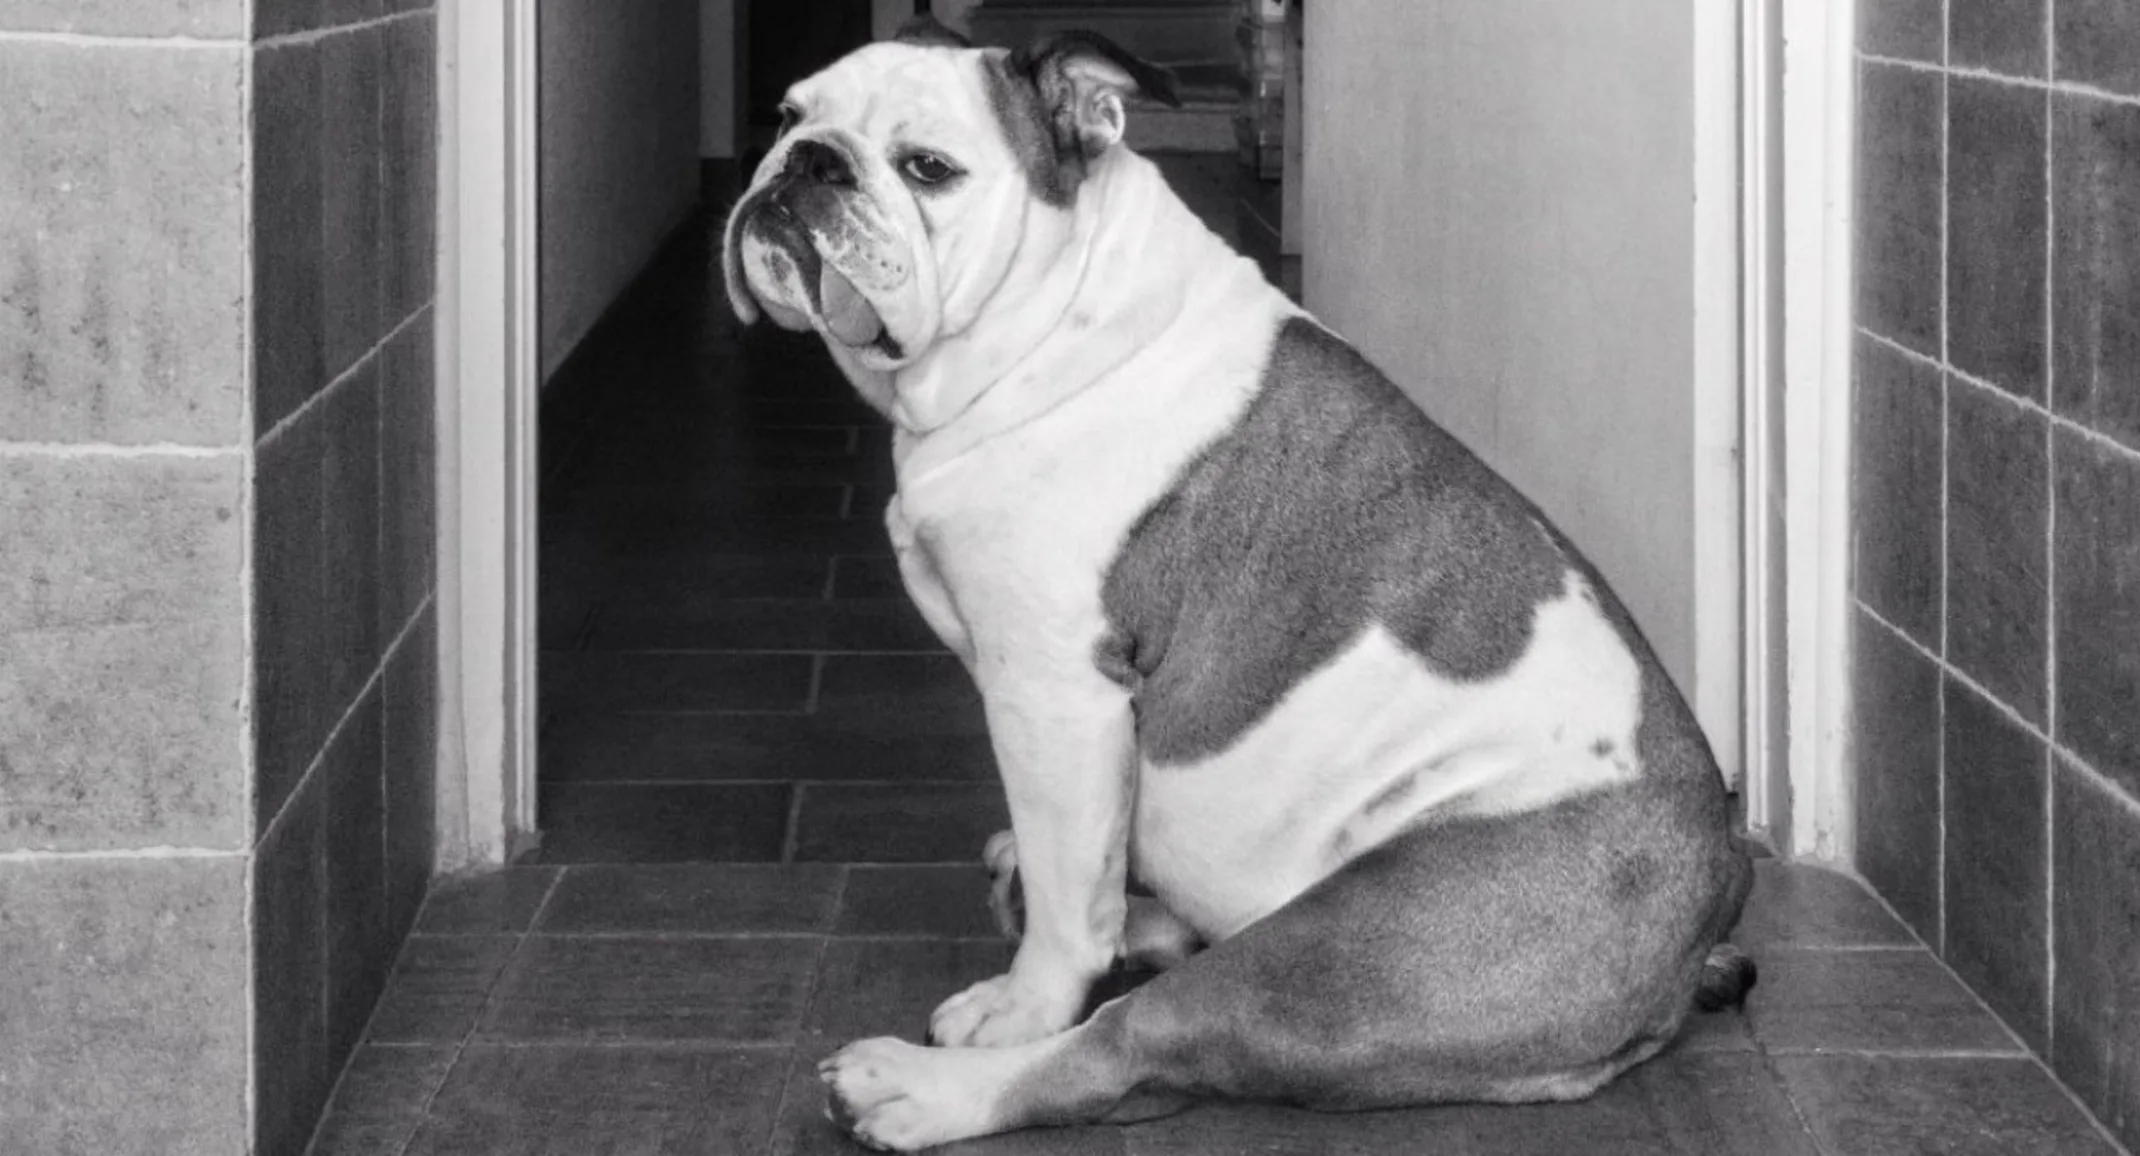 A Black & White Photo of a Dog Sitting Down Indoors